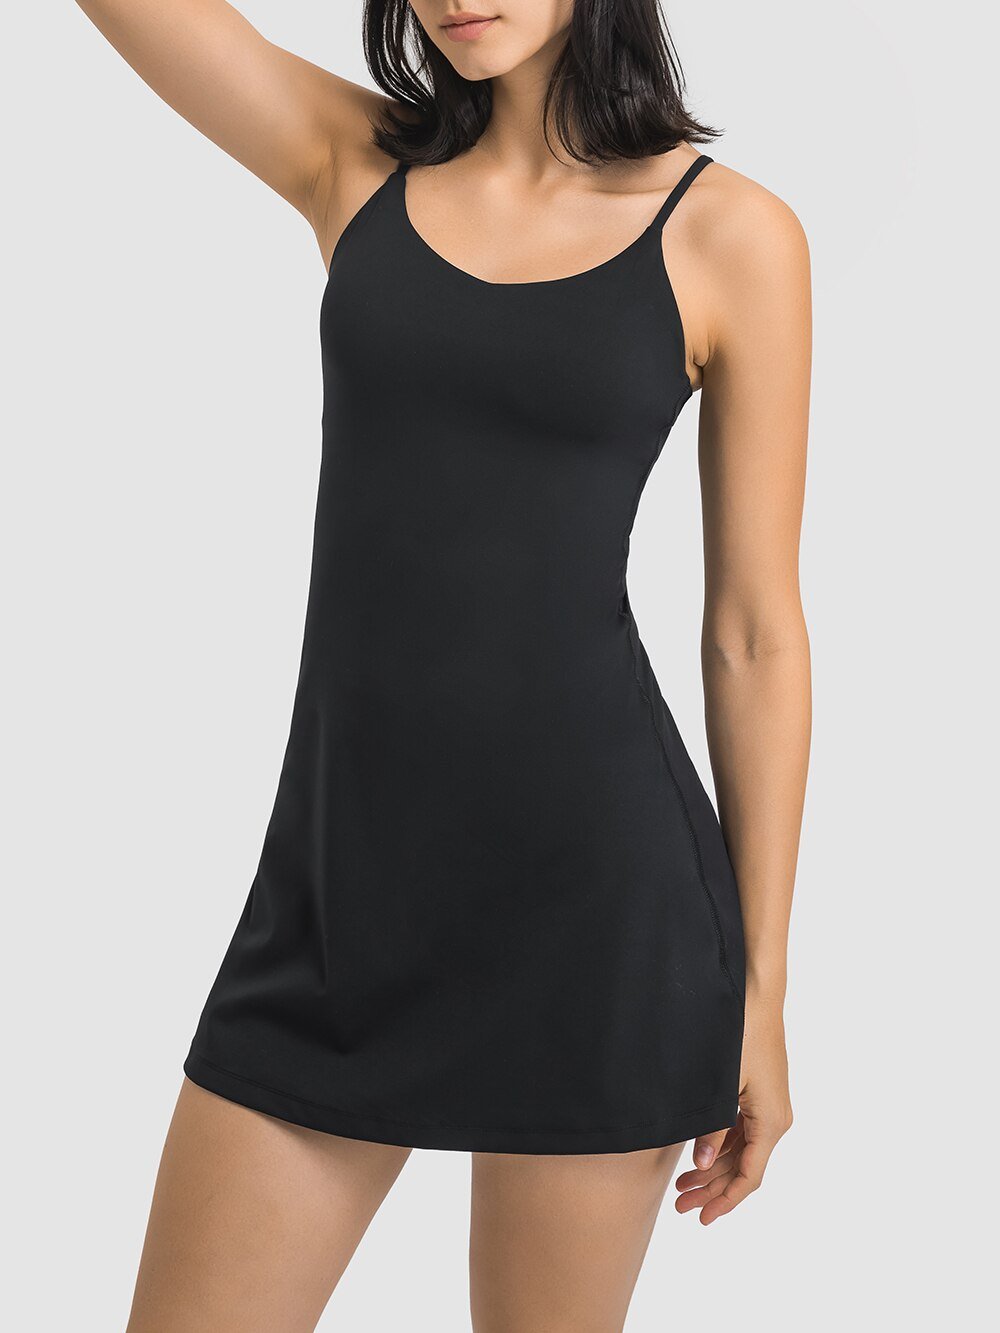 https://linions.com/cdn/shop/products/30-length-womens-tennis-dress-workout-dress-with-built-in-bra-exercise-dress-for-golf-athletic-dresses-for-women-843880.jpg?v=1686659912&width=1445